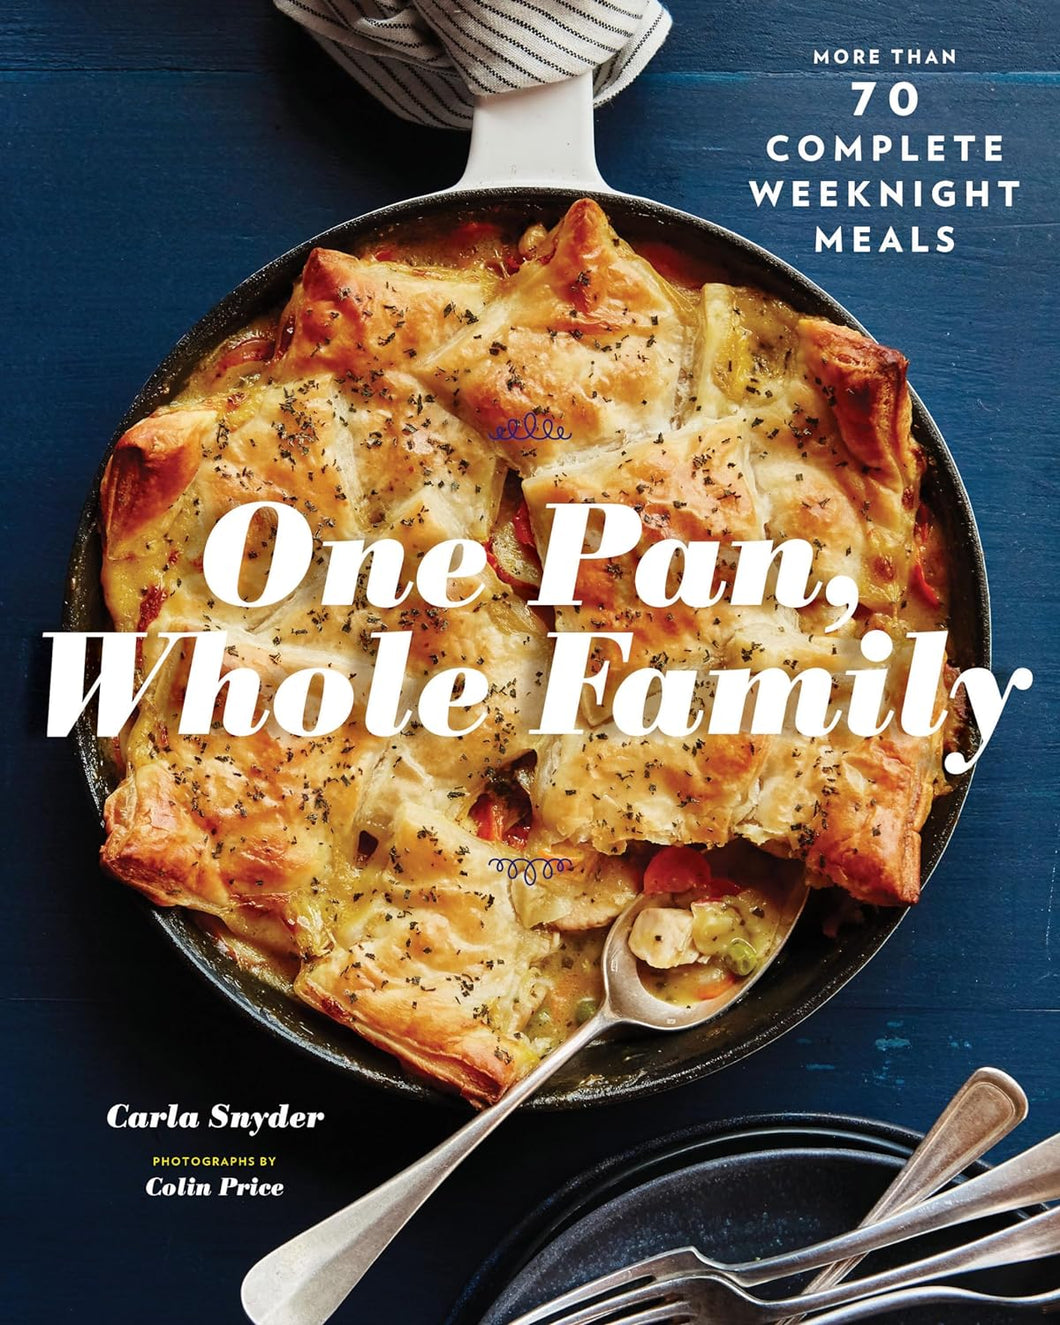 Cook Book - One Pan, Whole Family